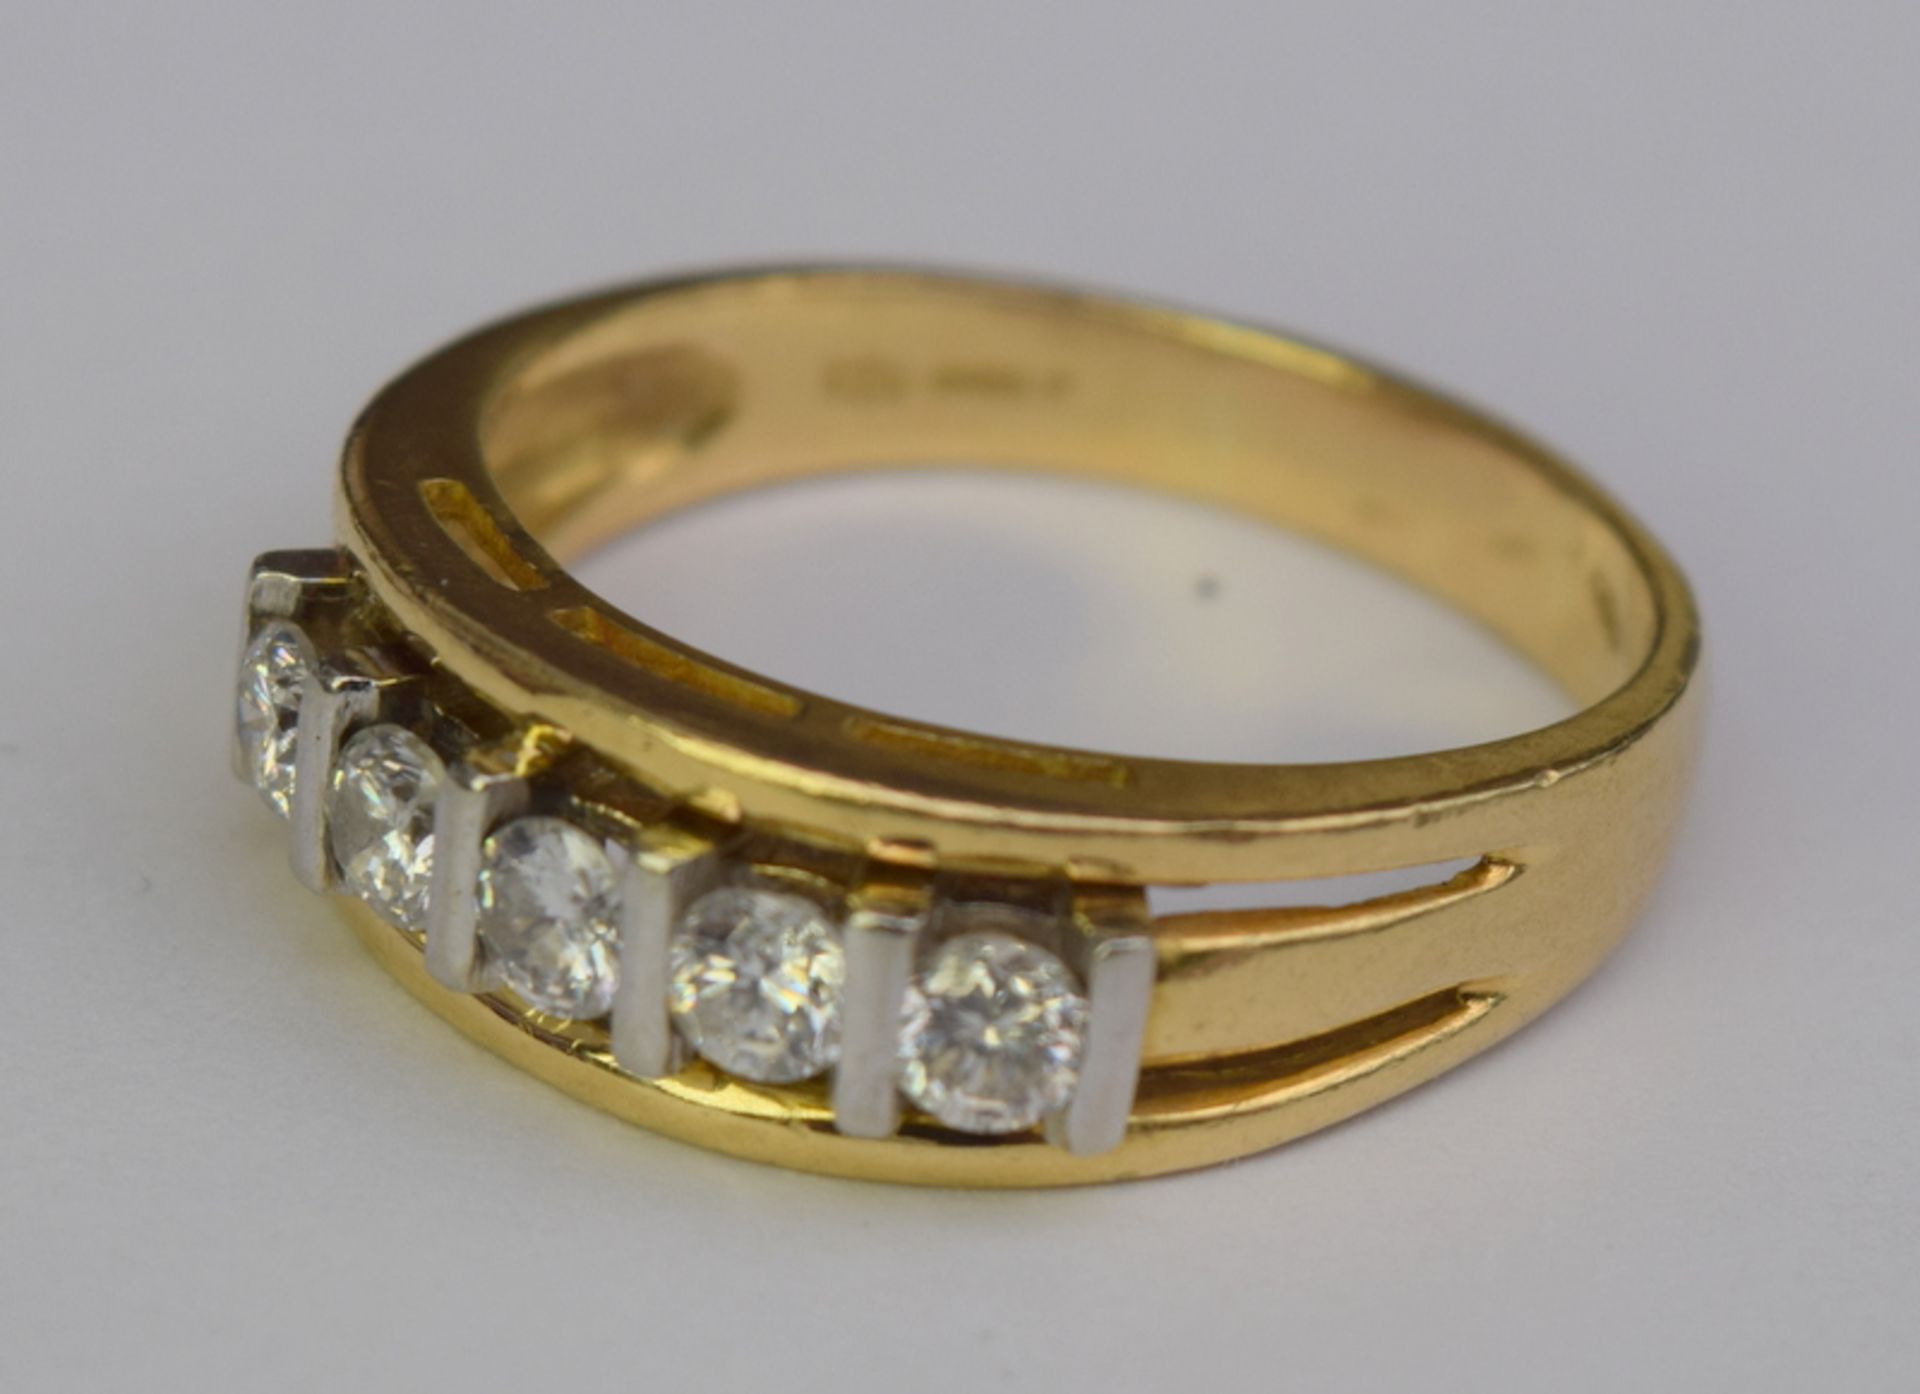 Excellent 18ct Gold And Platinum Mount Ring With Five Clear Diamonds - Image 2 of 7